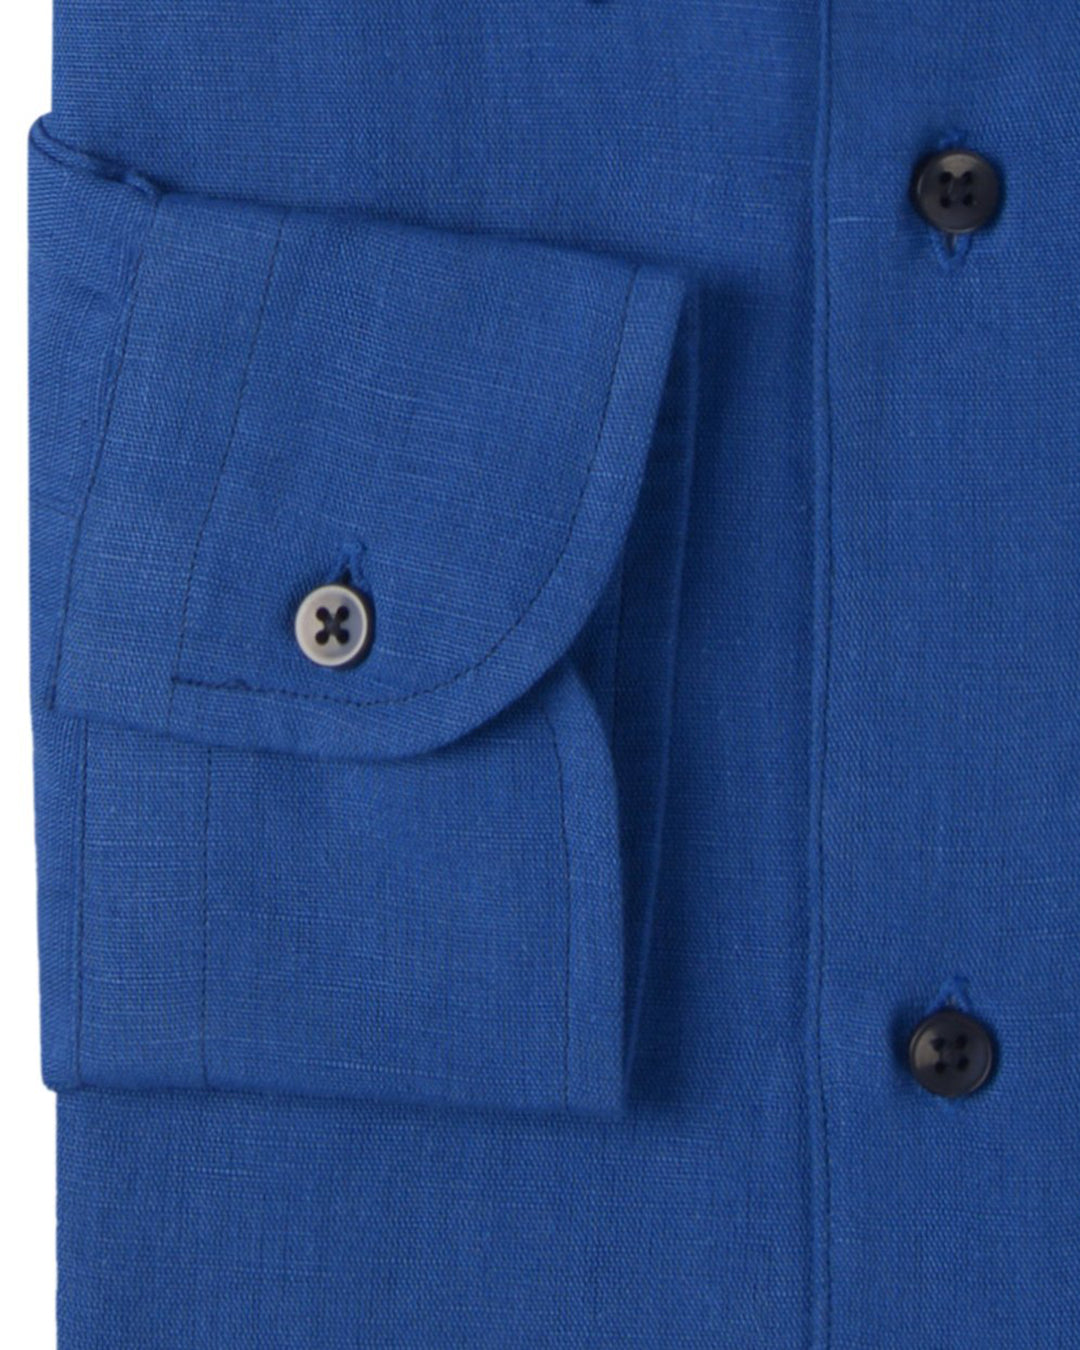 Cuff of custom linen shirt for men in casual blue by Luxire Clothing